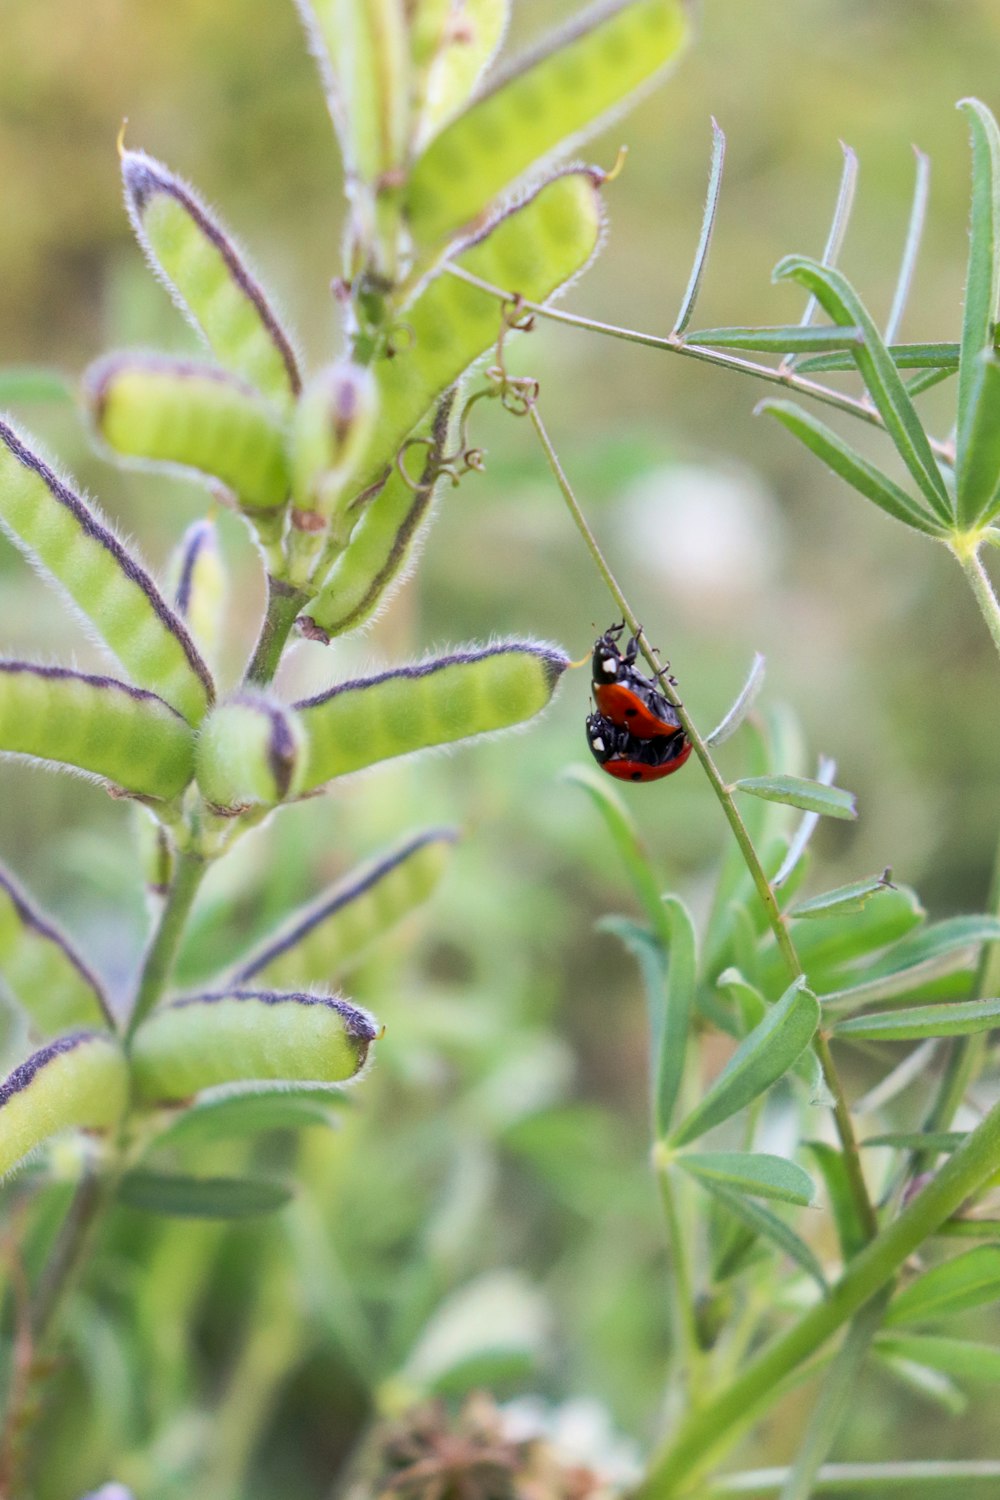 red and black ladybug on green plant